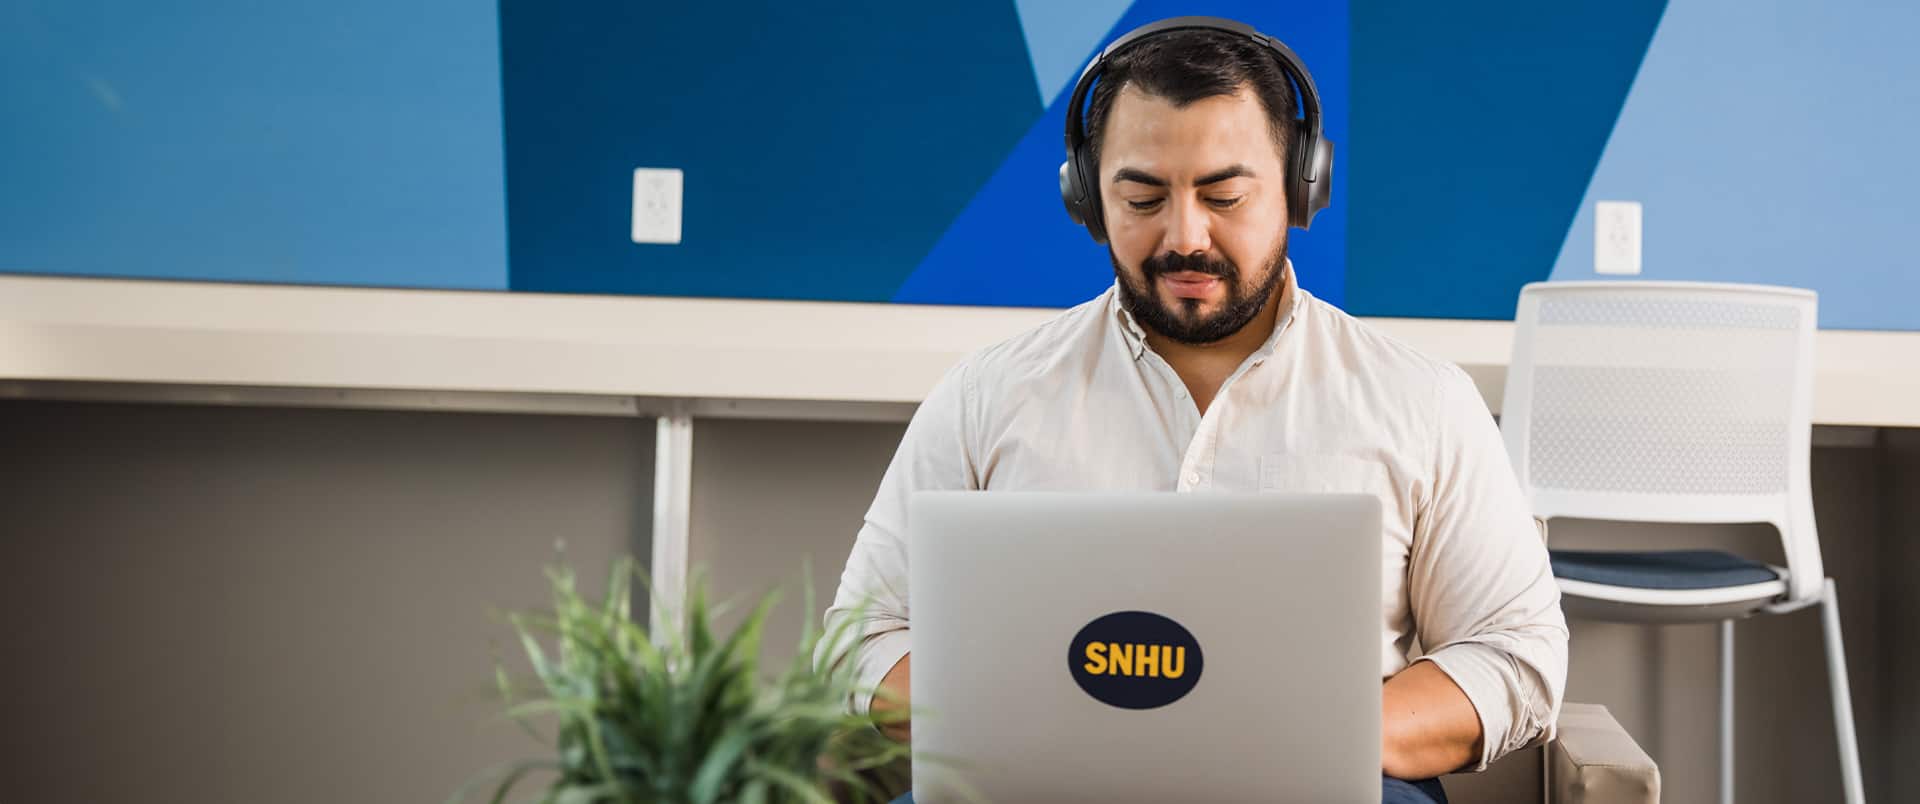 Jesús Súarez, who earned his degree from SNHU in 2021, wearing headphones and working on his laptop that has an SNHU sticker on the front.